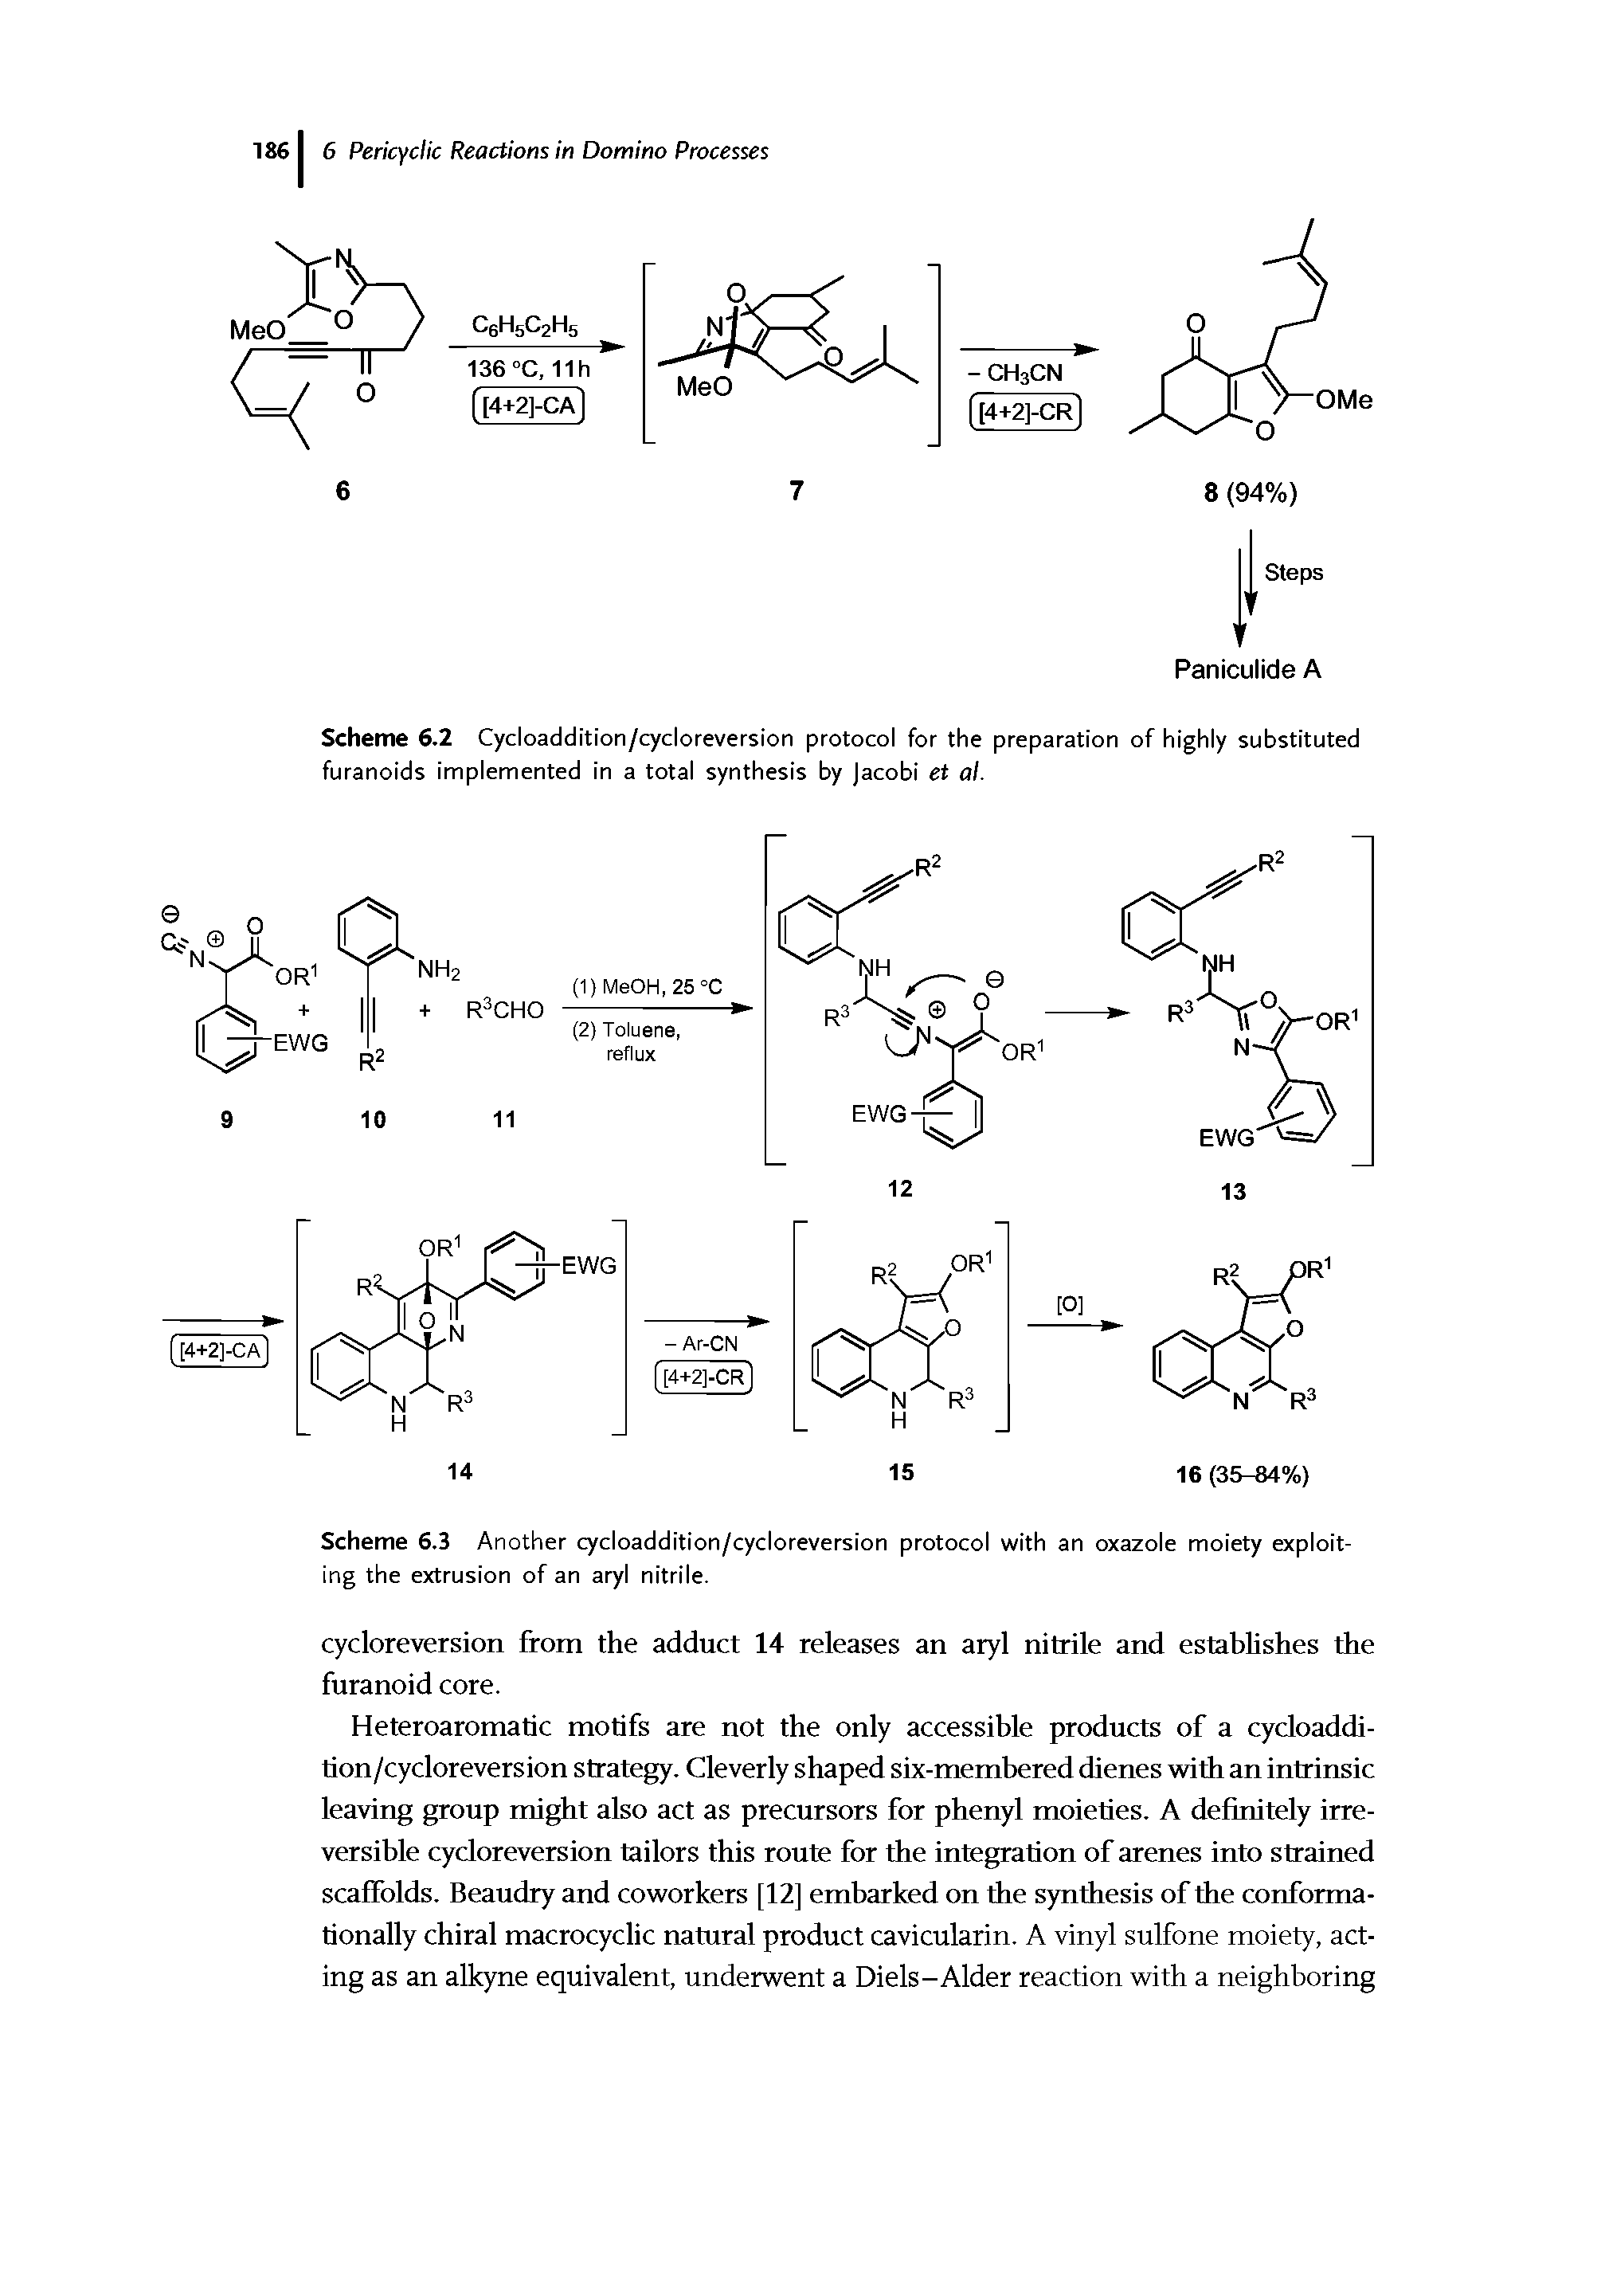 Scheme 6.3 Another cycloaddition/cycloreversion protocol with an oxazole moiety exploiting the extrusion of an aryl nitrile.